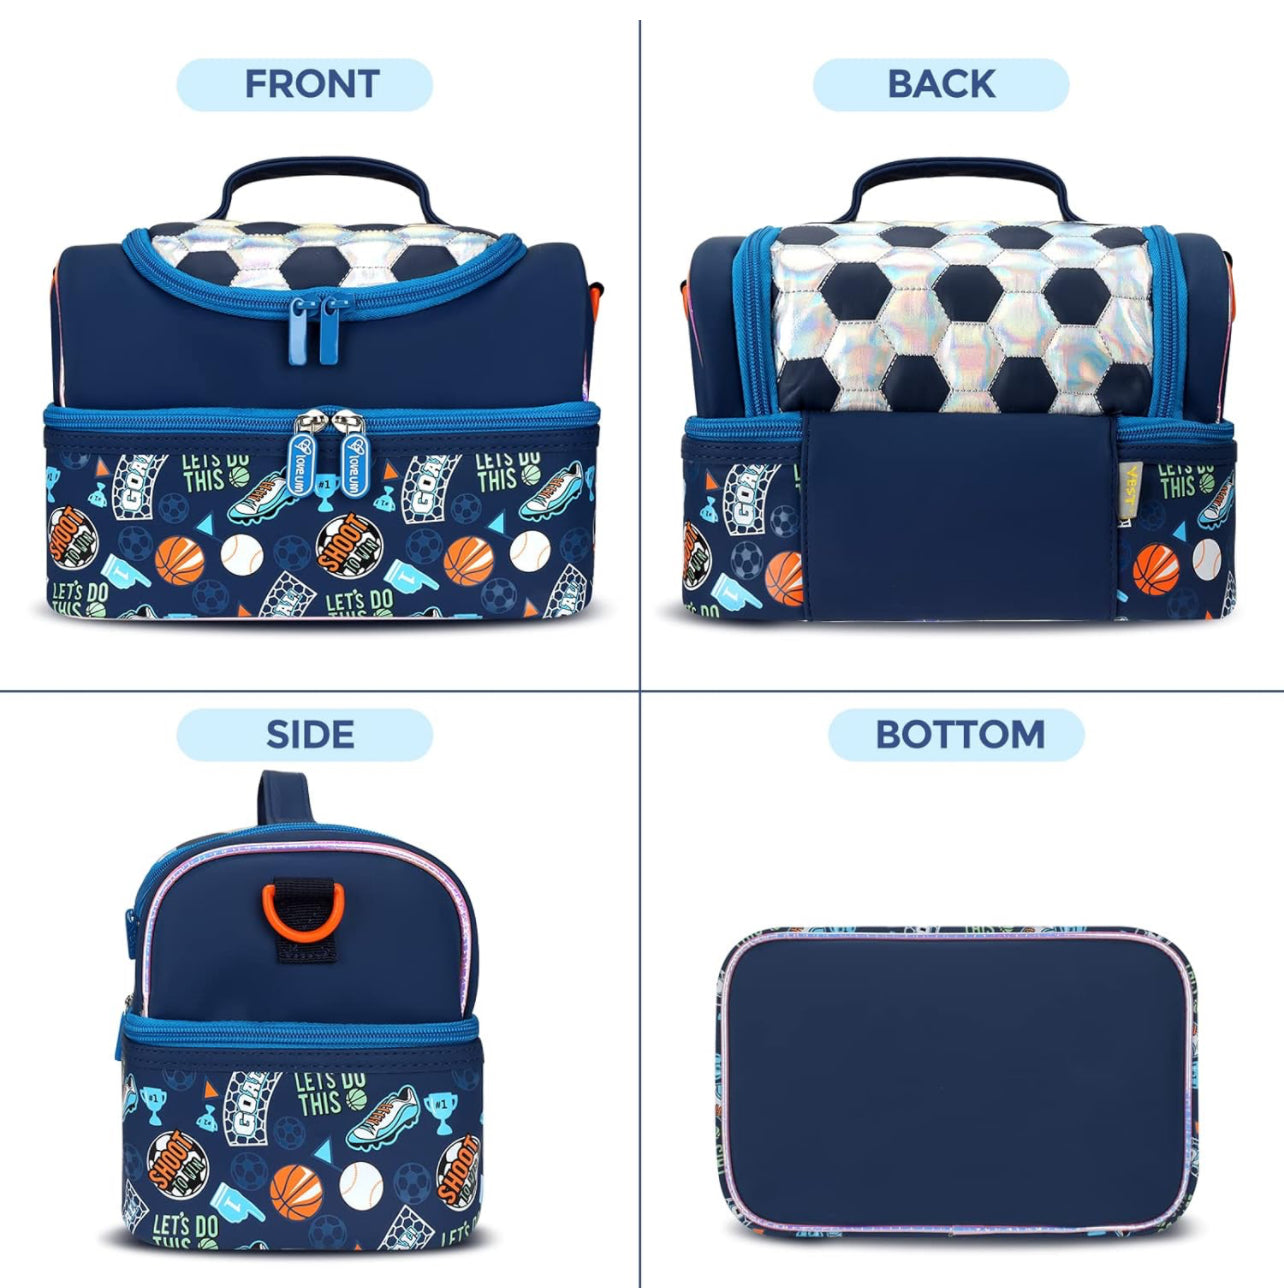 Multipurpose Double Decker Insulated Bag For Kids - Luxury Quality